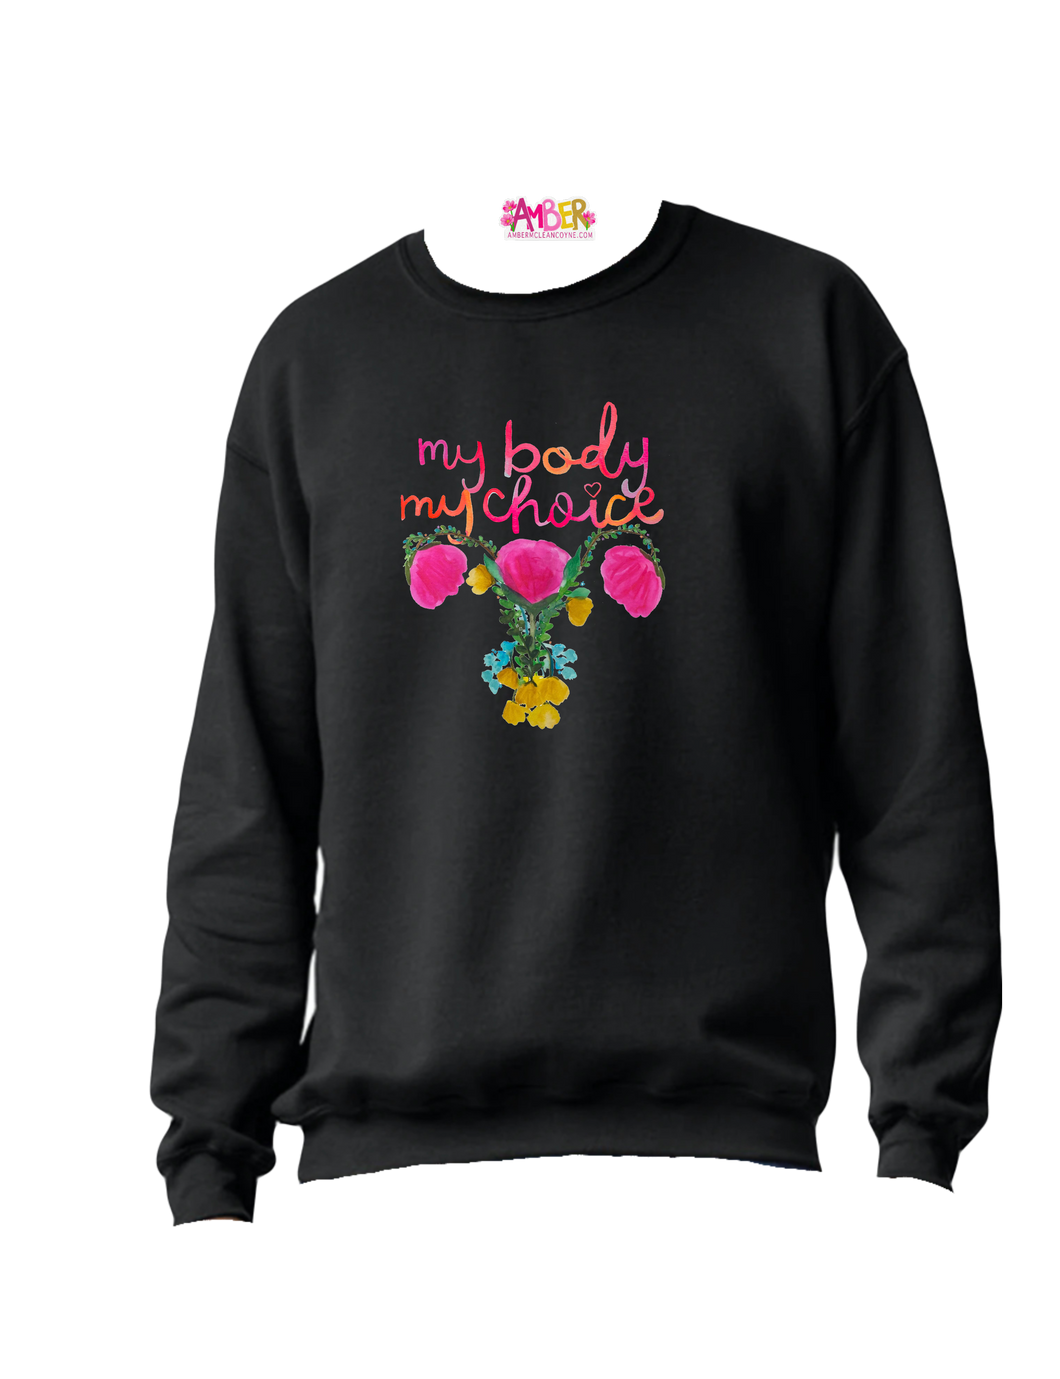 My Body My Choice Shirts, hoodies and more